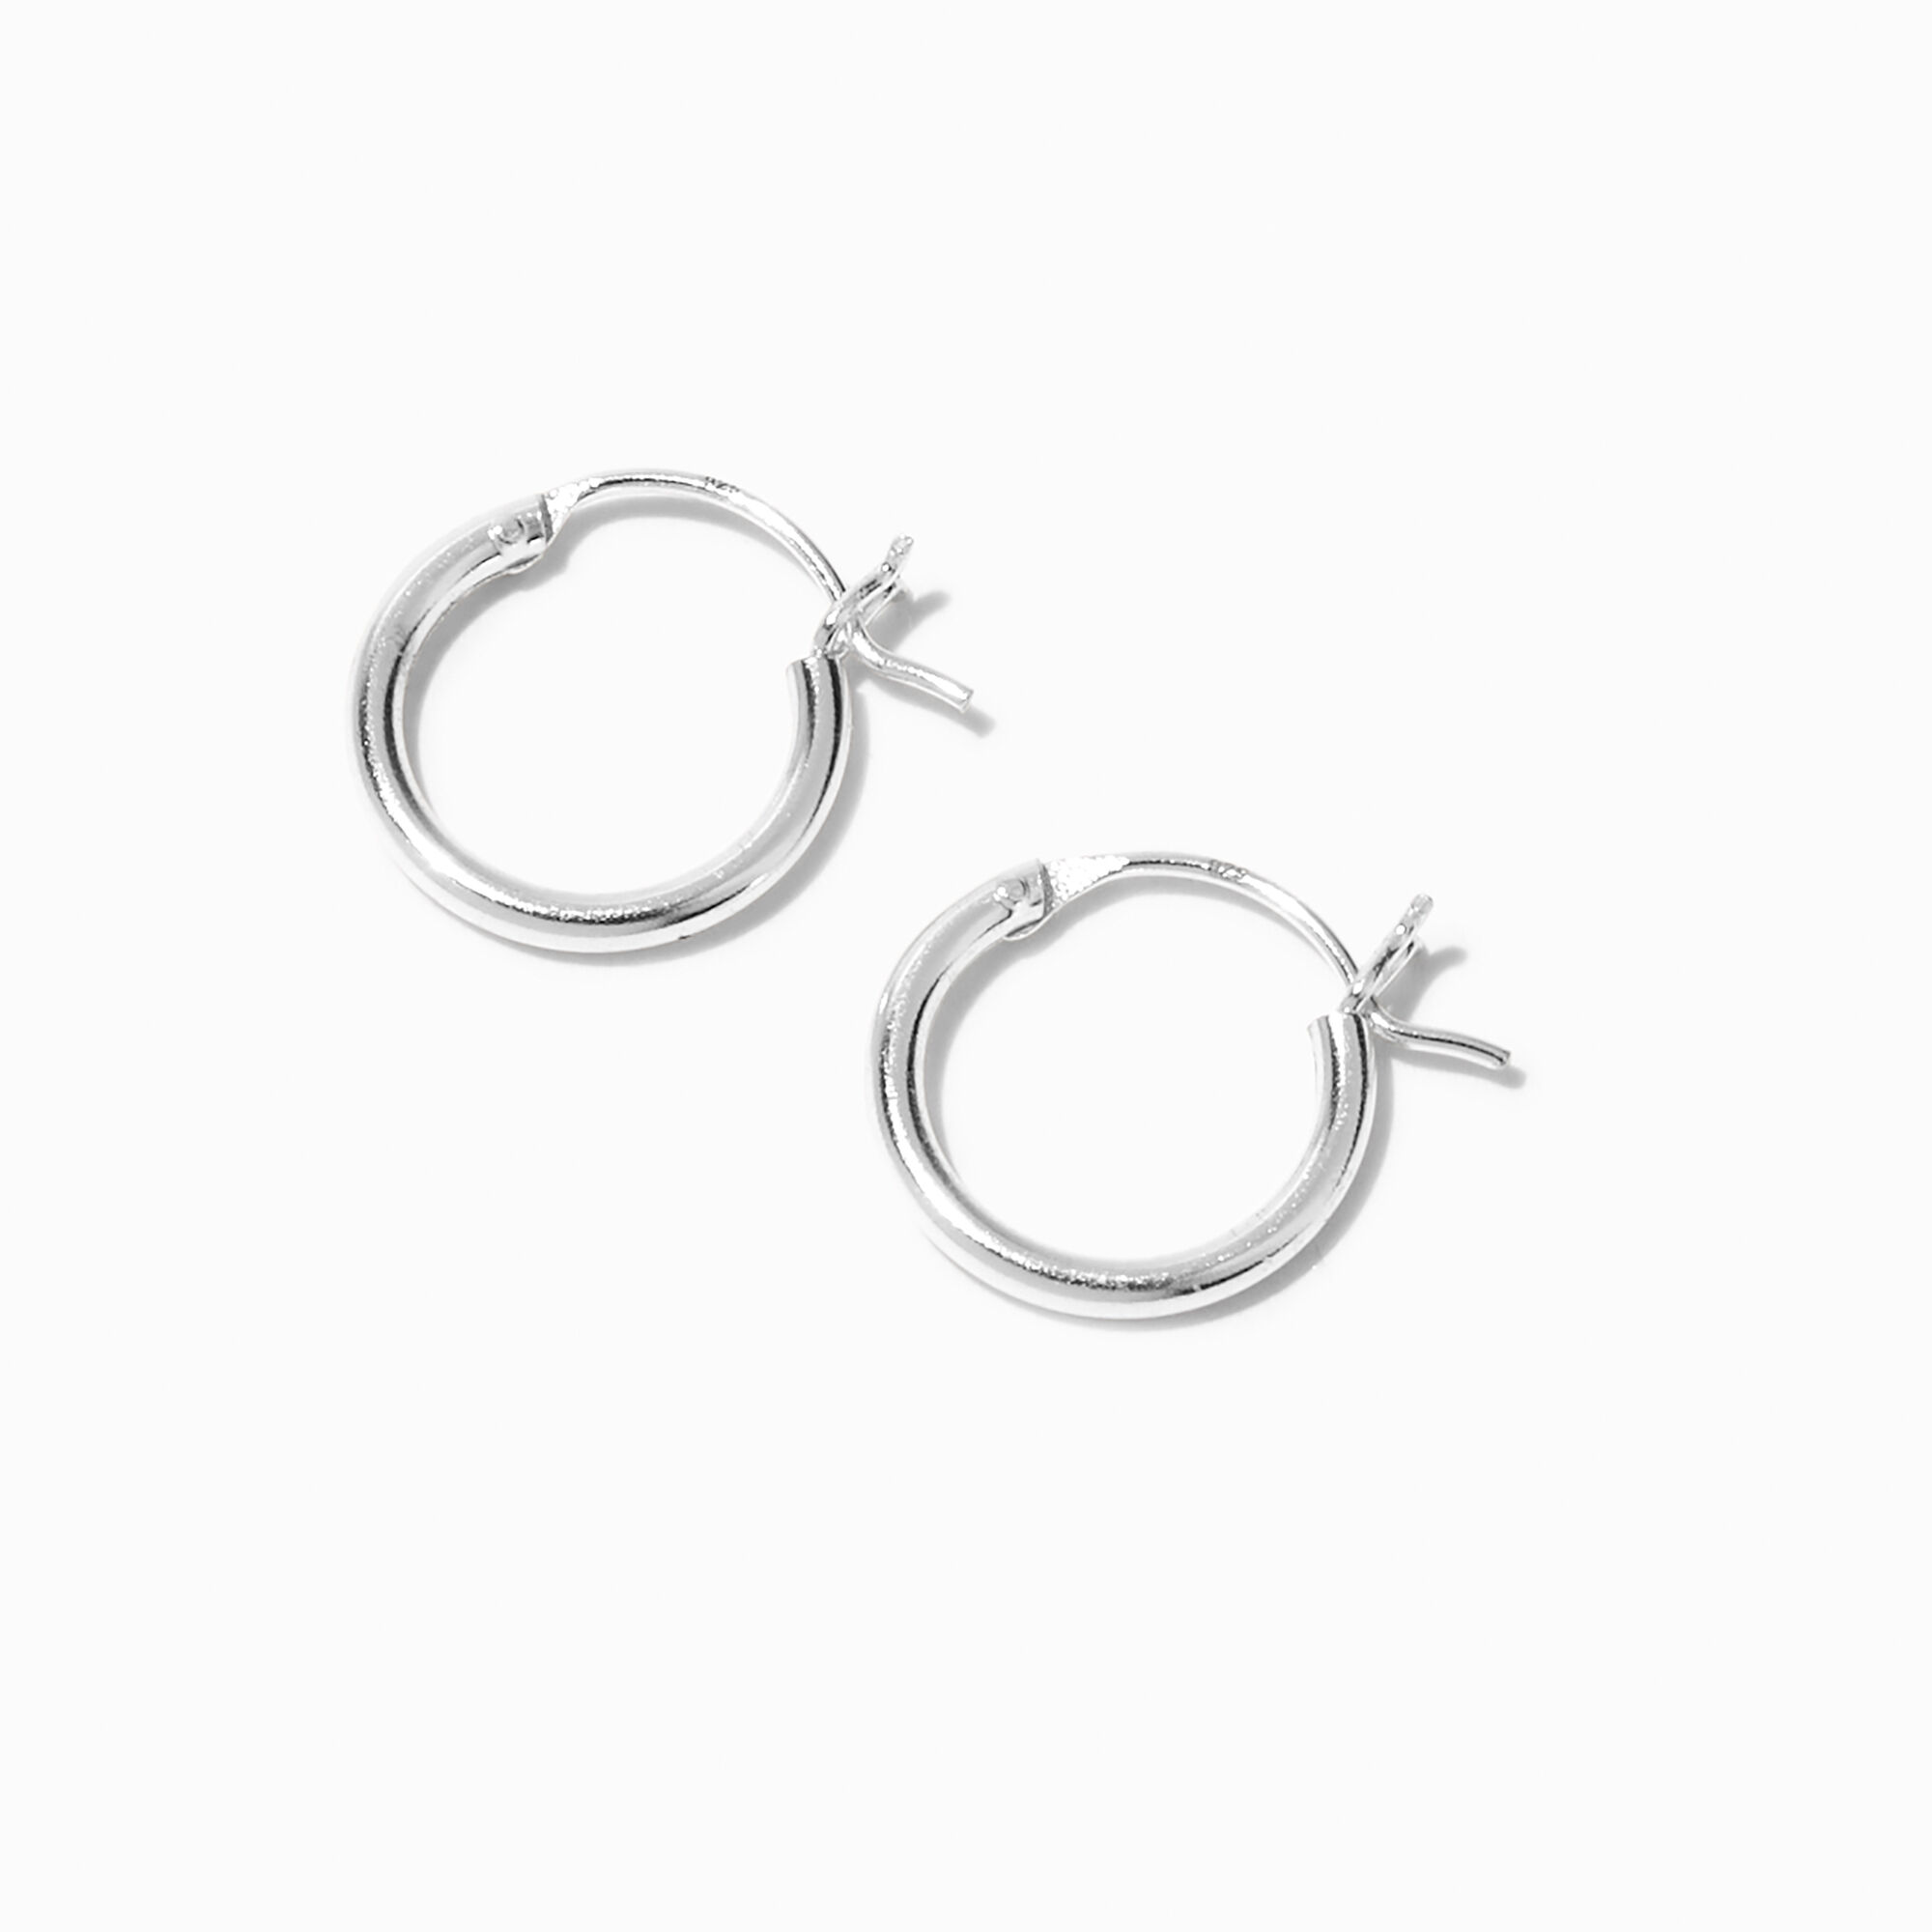 View C Luxe By Claires 12MM Hinge Hoop Earrings Silver information